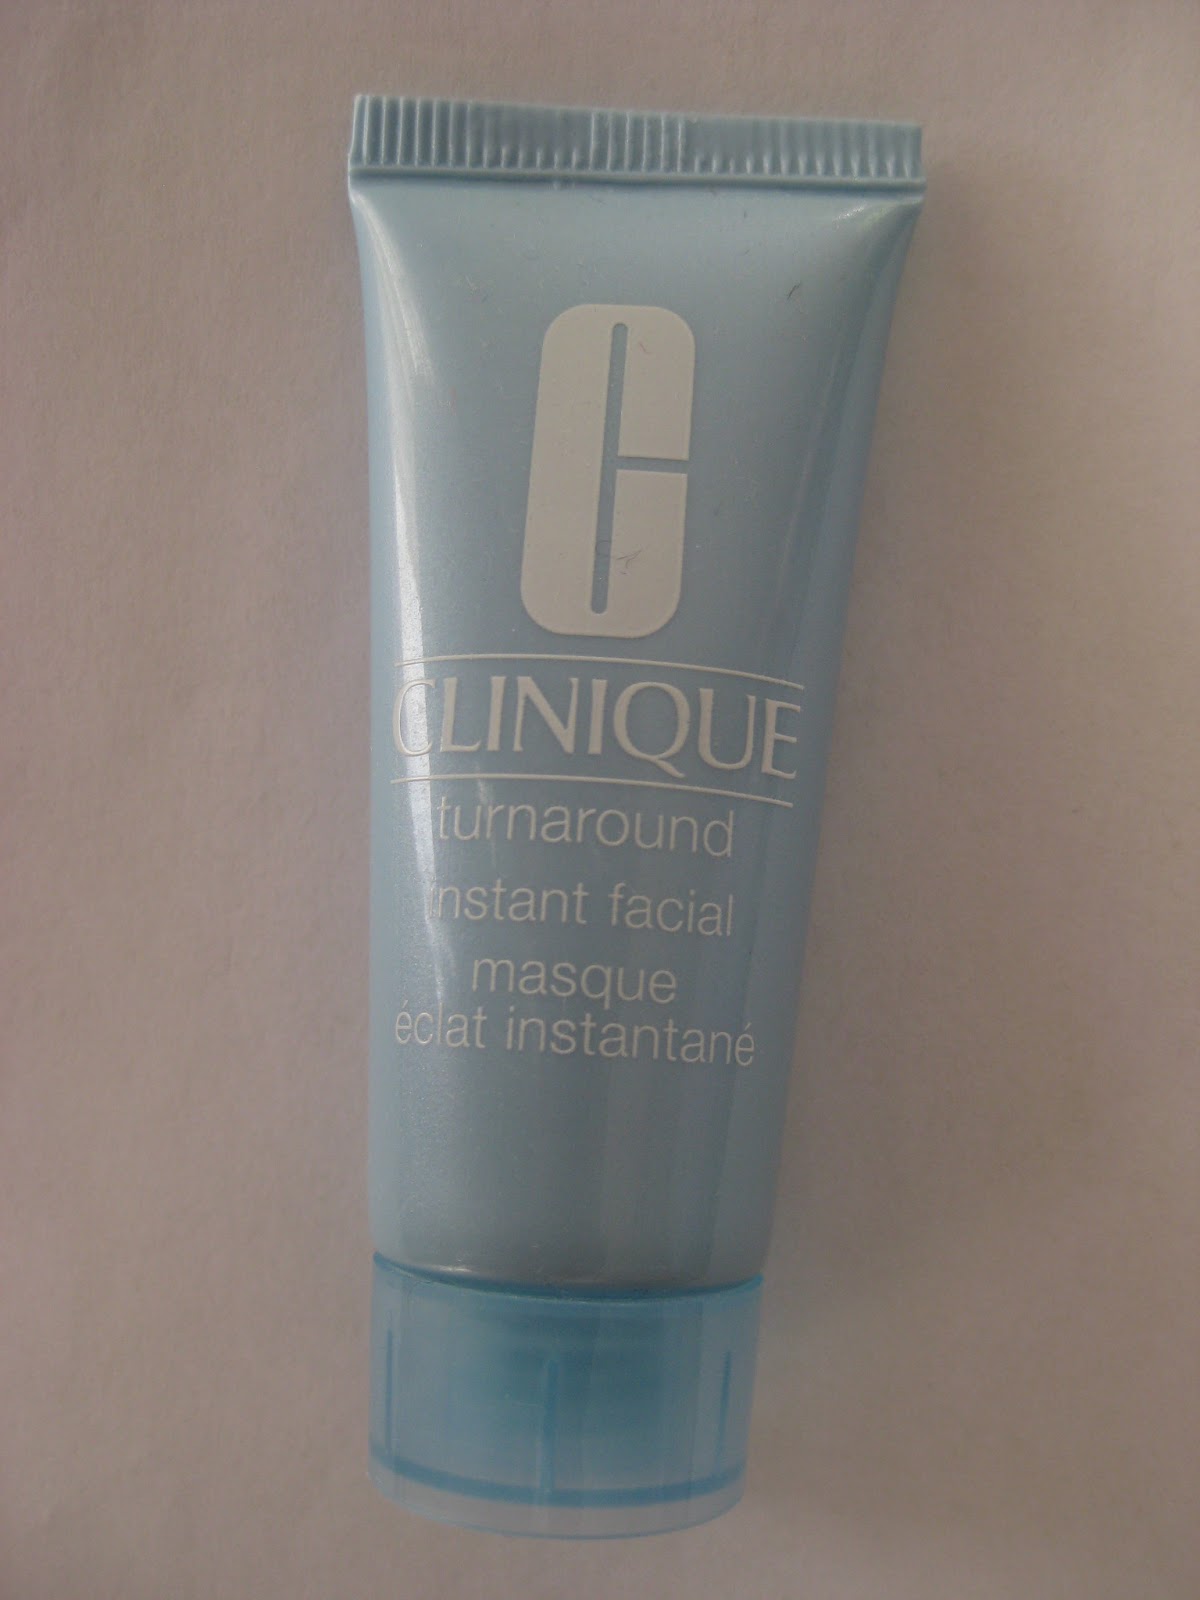 how to use clinique turnaround instant facial